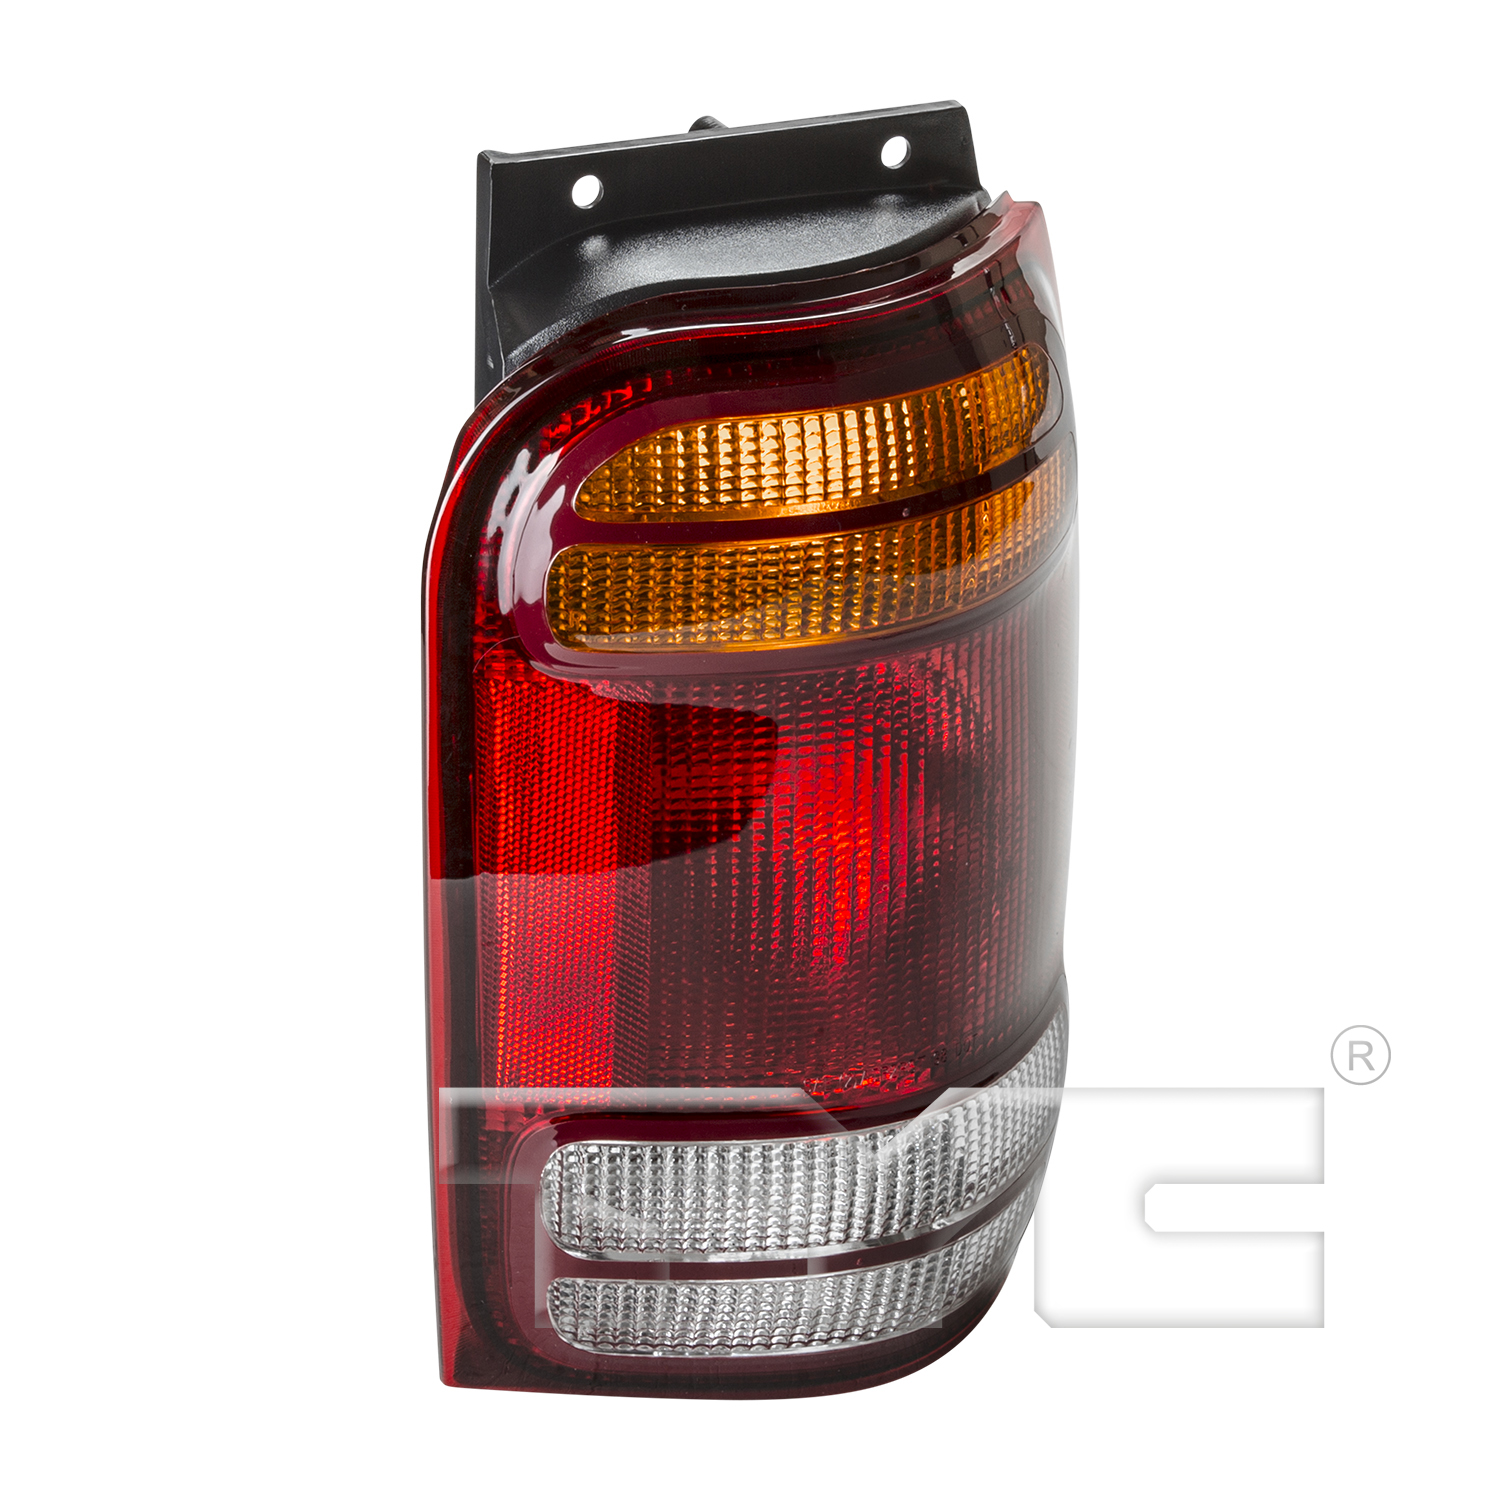 Aftermarket TAILLIGHTS for FORD - EXPLORER, EXPLORER,01-01,RT Taillamp assy